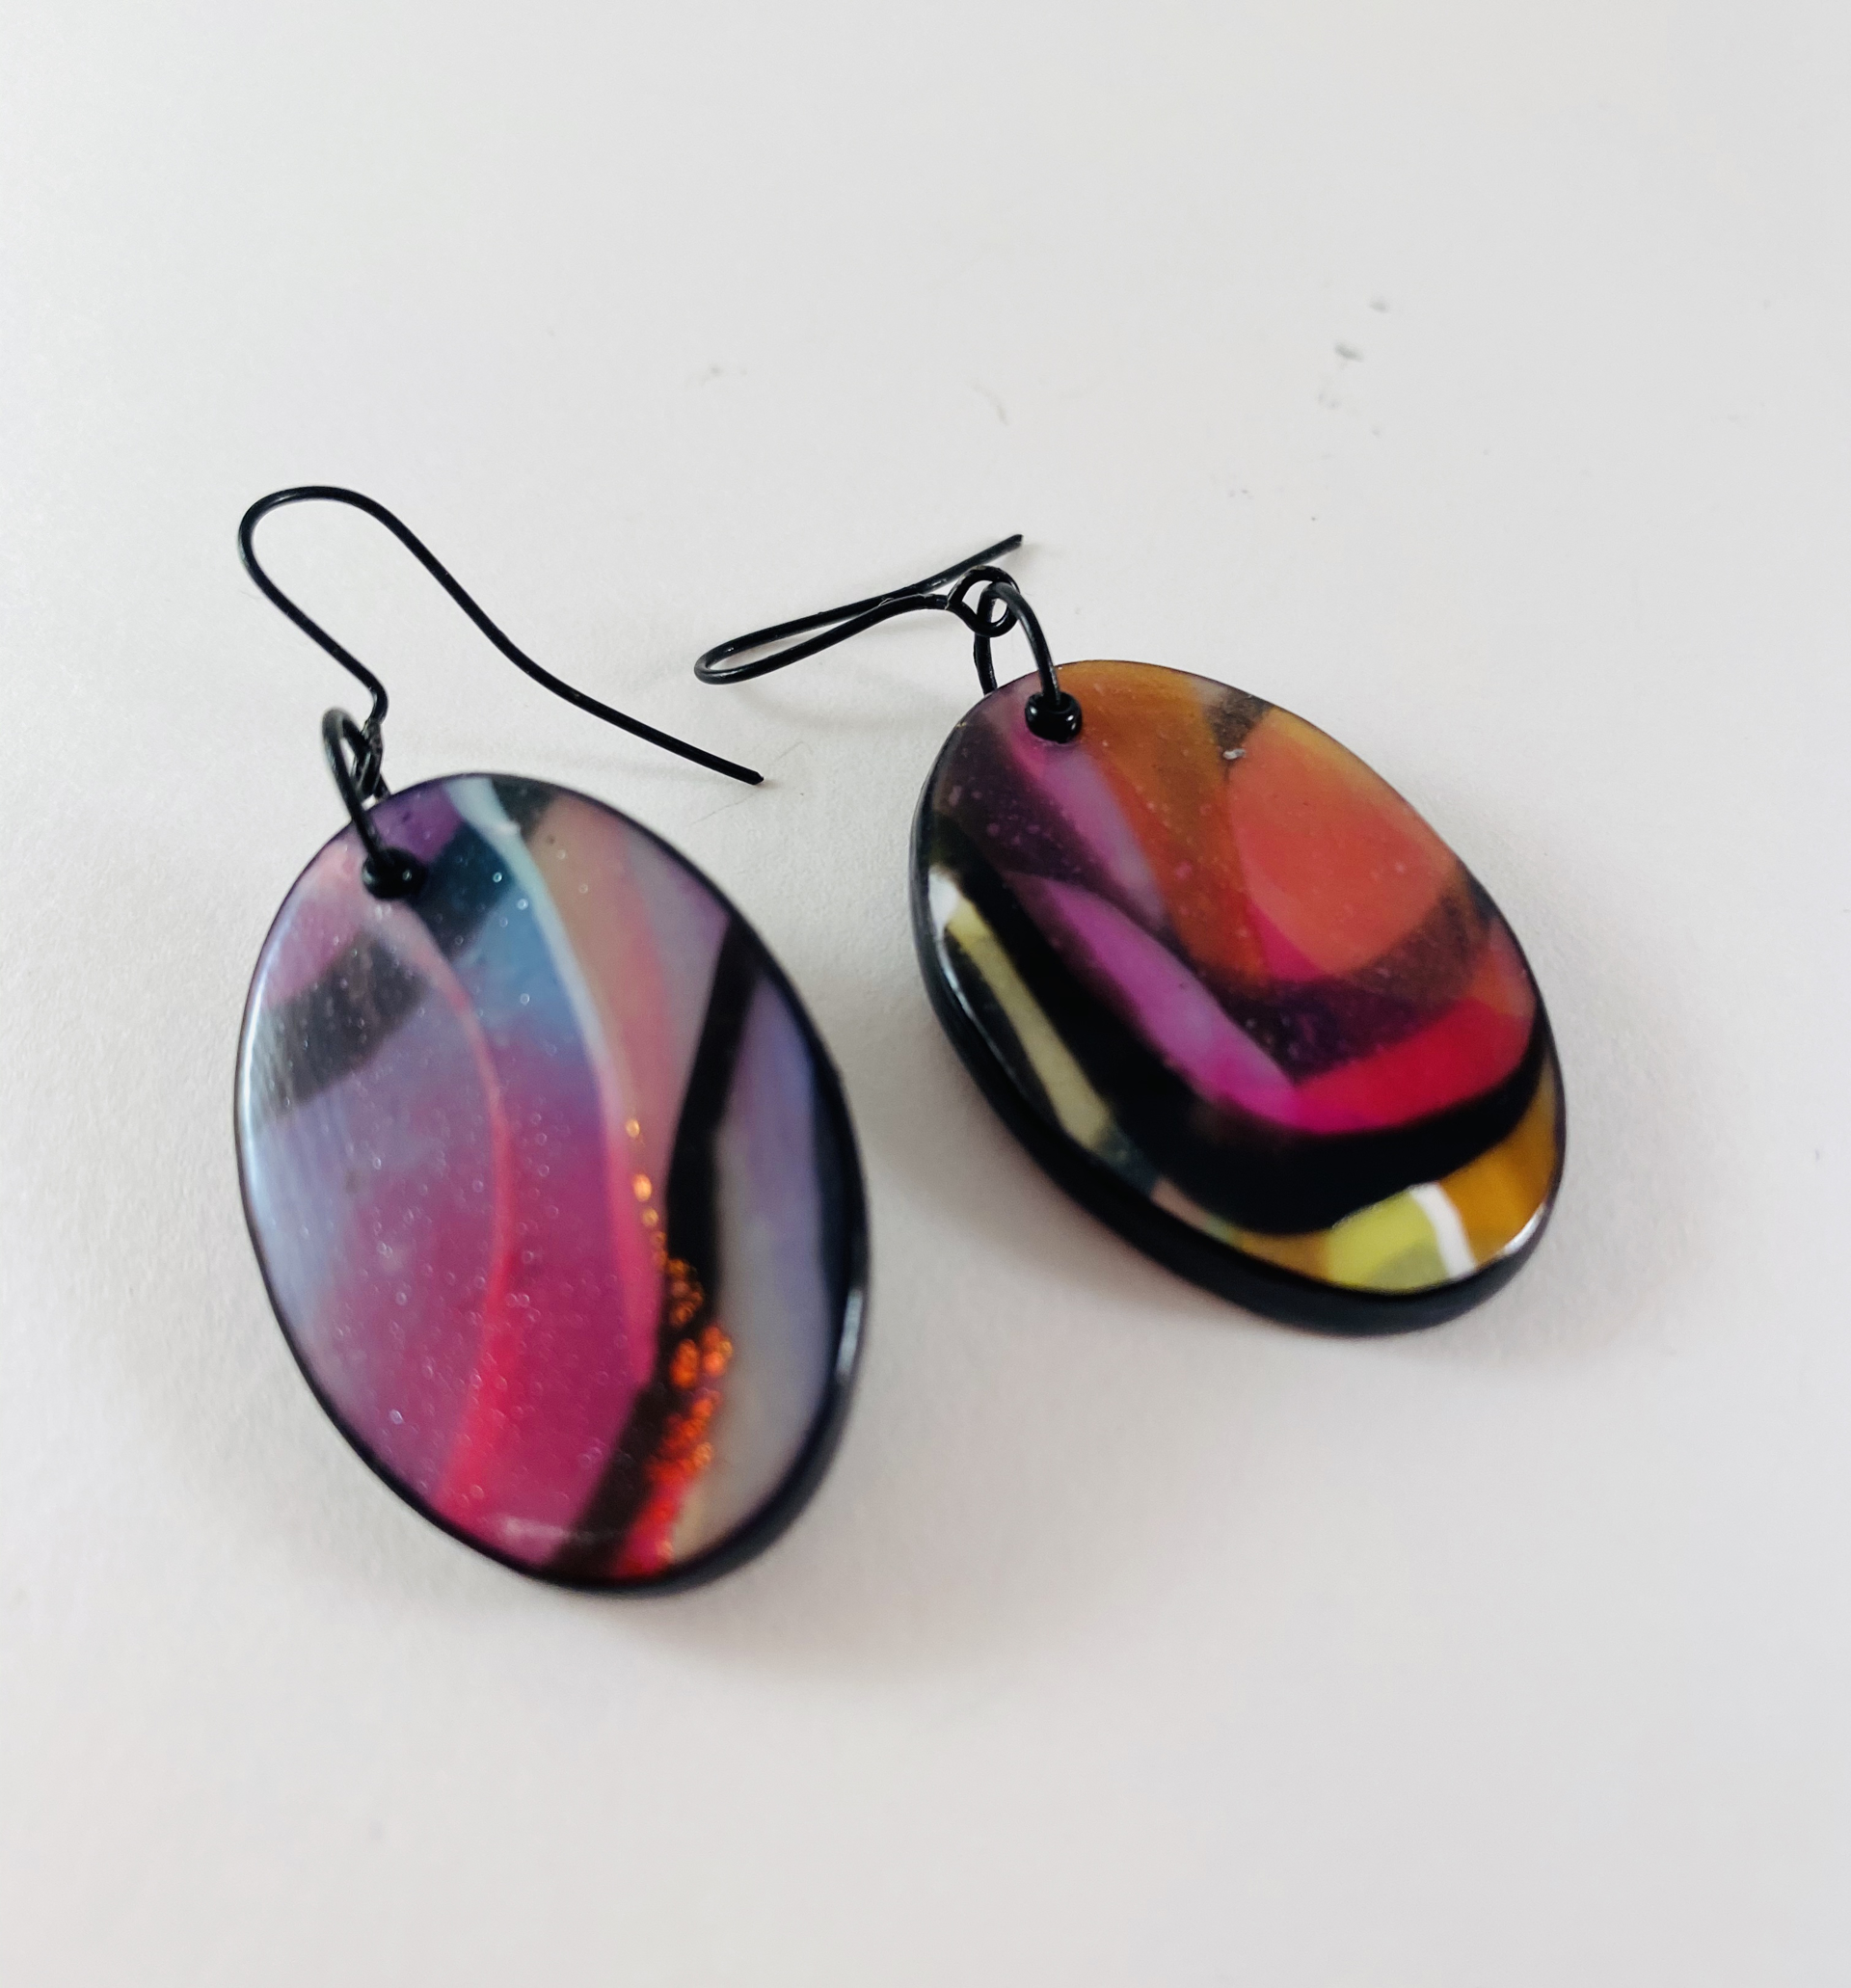 Oval Black and Multi-colored Earrings 1r by Nancy Roth